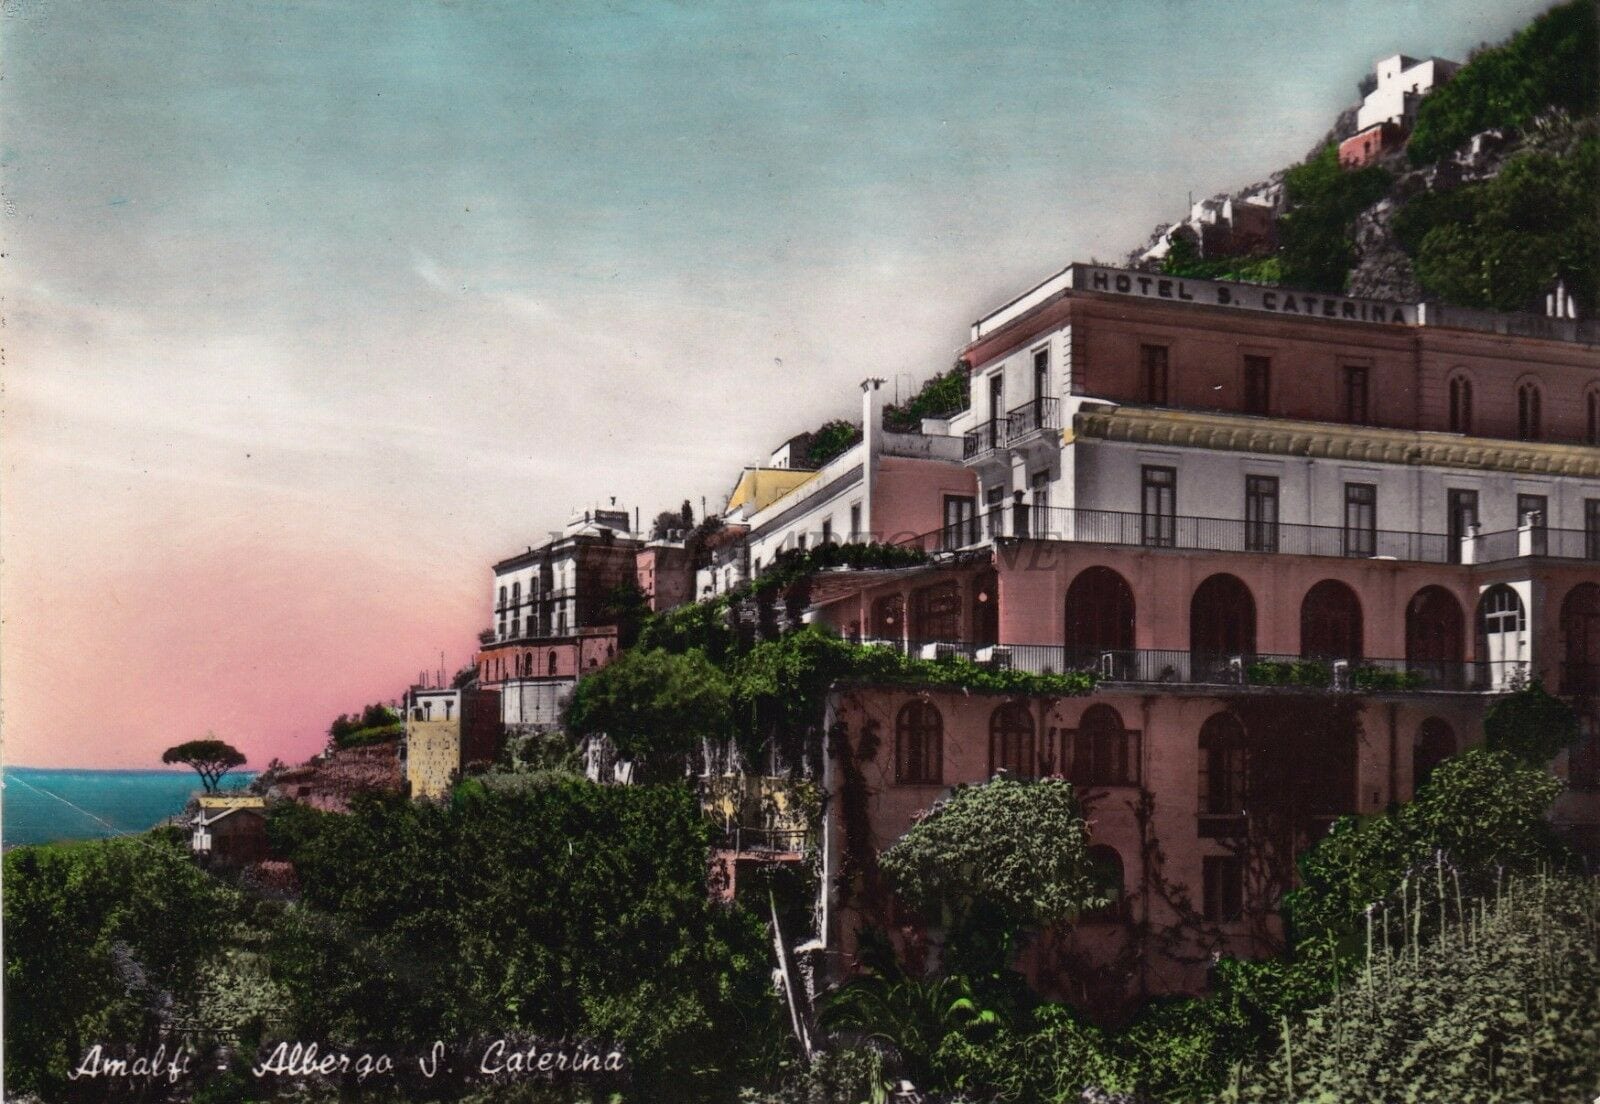 Hotel Santa Caterina in Amalfi. Photo 1956. The hotel is located in a villa of the end of the 19th century in a “free style”, in the picturesque landscape of the Amalfi coast...